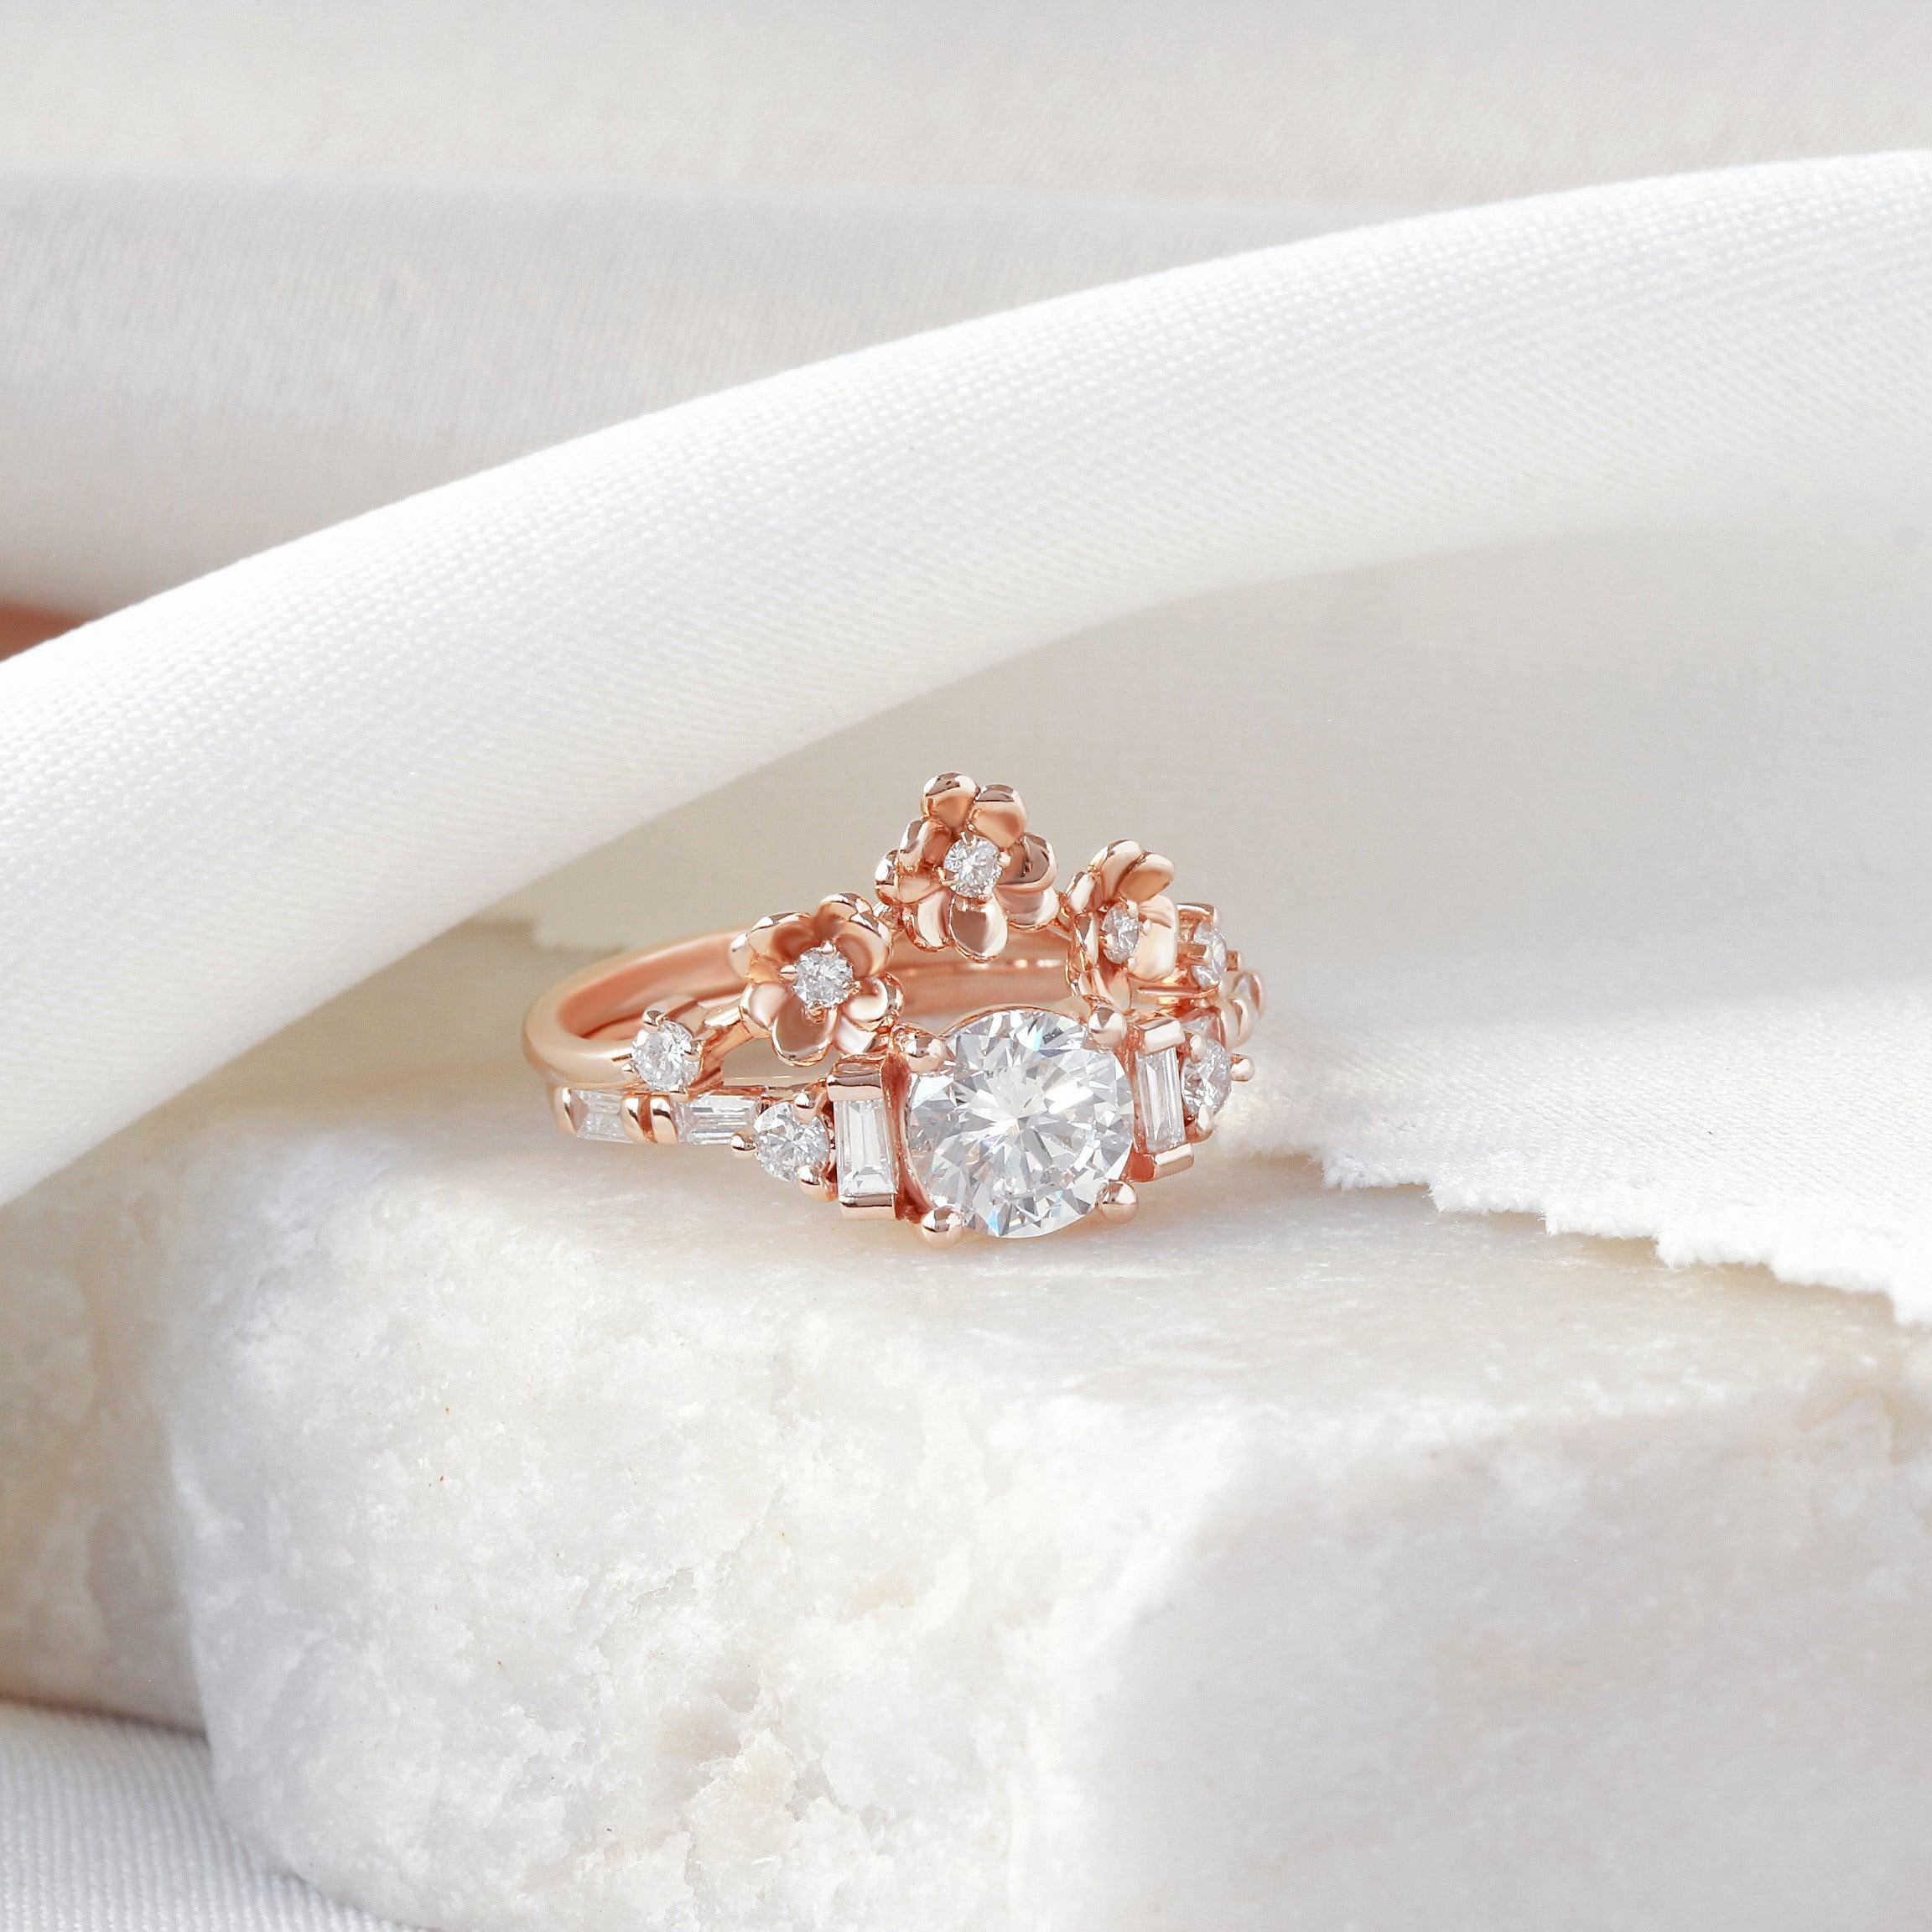 Beautiful and unique Engagement Ring with a Round Moissanite Center stone and Baguette accent diamonds. The band is set with white baguette diamonds.
Handmade with love and care by Silly Shiny Diamonds.
The list is for the engagement ring